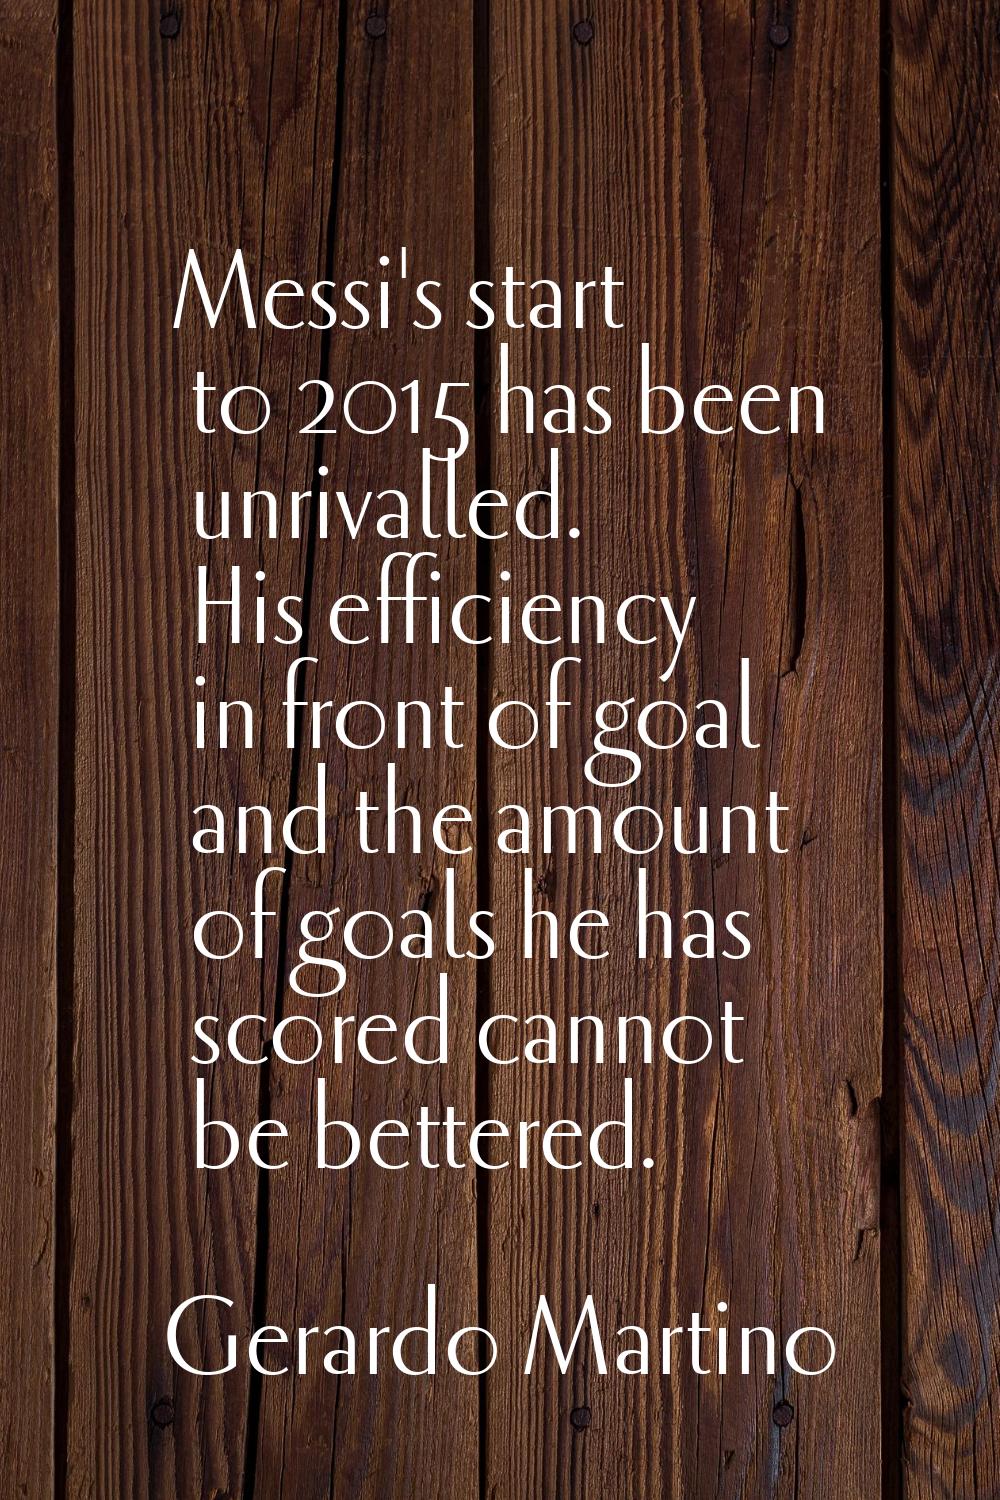 Messi's start to 2015 has been unrivalled. His efficiency in front of goal and the amount of goals 